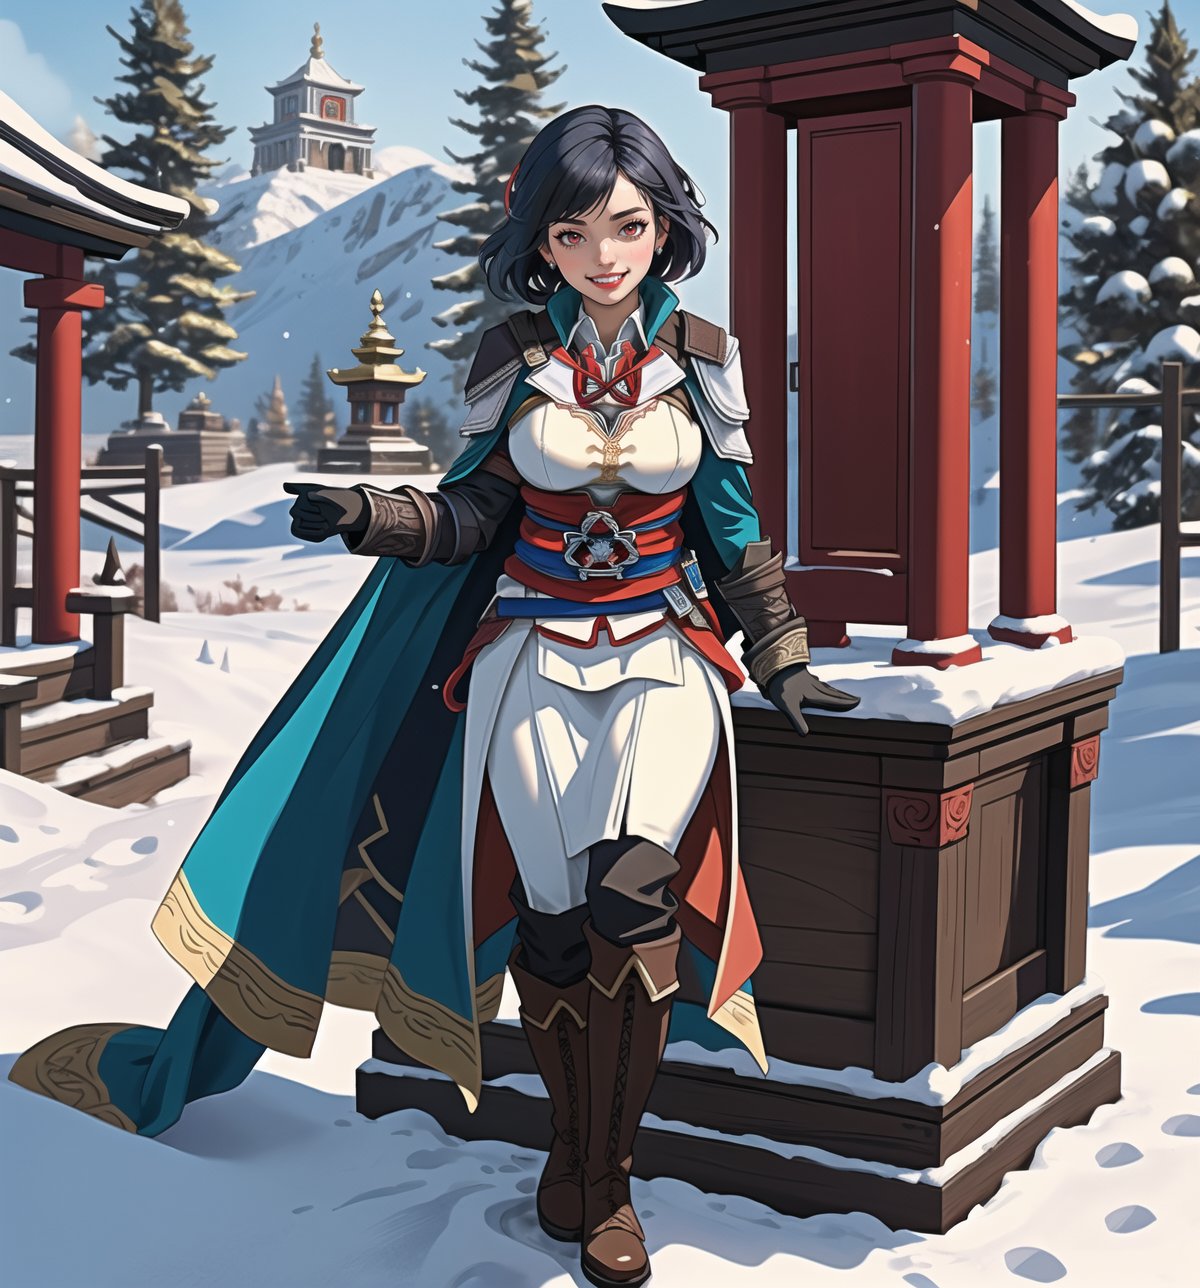 An ultra-detailed 16K masterpiece in the styles of ((Assassin's Creed)), fantasy and adventure, rendered in ultra-high resolution with realistic detail. Fammy, a beautiful 23-year-old woman, is dressed as an assassin in an ancient temple in the snowy mountains. She wears a black cape, a white tunic, a black belt, black boots and black gloves. Her short blue hair is styled in a Mohican cut with gradient effects. She has red eyes, looking at the viewer while ((smiling, showing her teeth)) and wearing red lipstick. The image emphasises Fammy's imposing figure and the architectural elements of the ancient temple. The rocky, wooden and carved structures, together with the statuettes and the backdrop of snowy mountains, create a mysterious and tense atmosphere. The melted wax candles, stone sarcophagus and bones scattered on the floor add macabre detail to the scene. Soft, sombre lighting effects create a relaxing, mysterious atmosphere, while detailed textures on the structures and costume add realism to the image. | A tense and mysterious scene of a beautiful assassin in an ancient temple in the snowy mountains, fusing elements of Assassin's Creed, fantasy and adventure. (((The image reveals a full-body shot as Fammy assumes a sensual pose, engagingly leaning against a structure within the scene in an exciting manner. She takes on a sensual pose as she interacts, boldly leaning on a structure, leaning back and boldly throwing herself onto the structure, reclining back in an exhilarating way.))). | ((((full-body shot)))), ((perfect pose)), ((perfect limbs, perfect fingers, better hands, perfect hands, hands)), ((perfect legs, perfect feet)), ((huge breasts)), ((perfect design)), ((perfect composition)), ((very detailed scene, very detailed background, perfect layout, correct imperfections)), Enhance, Ultra details++, More Detail, poakl